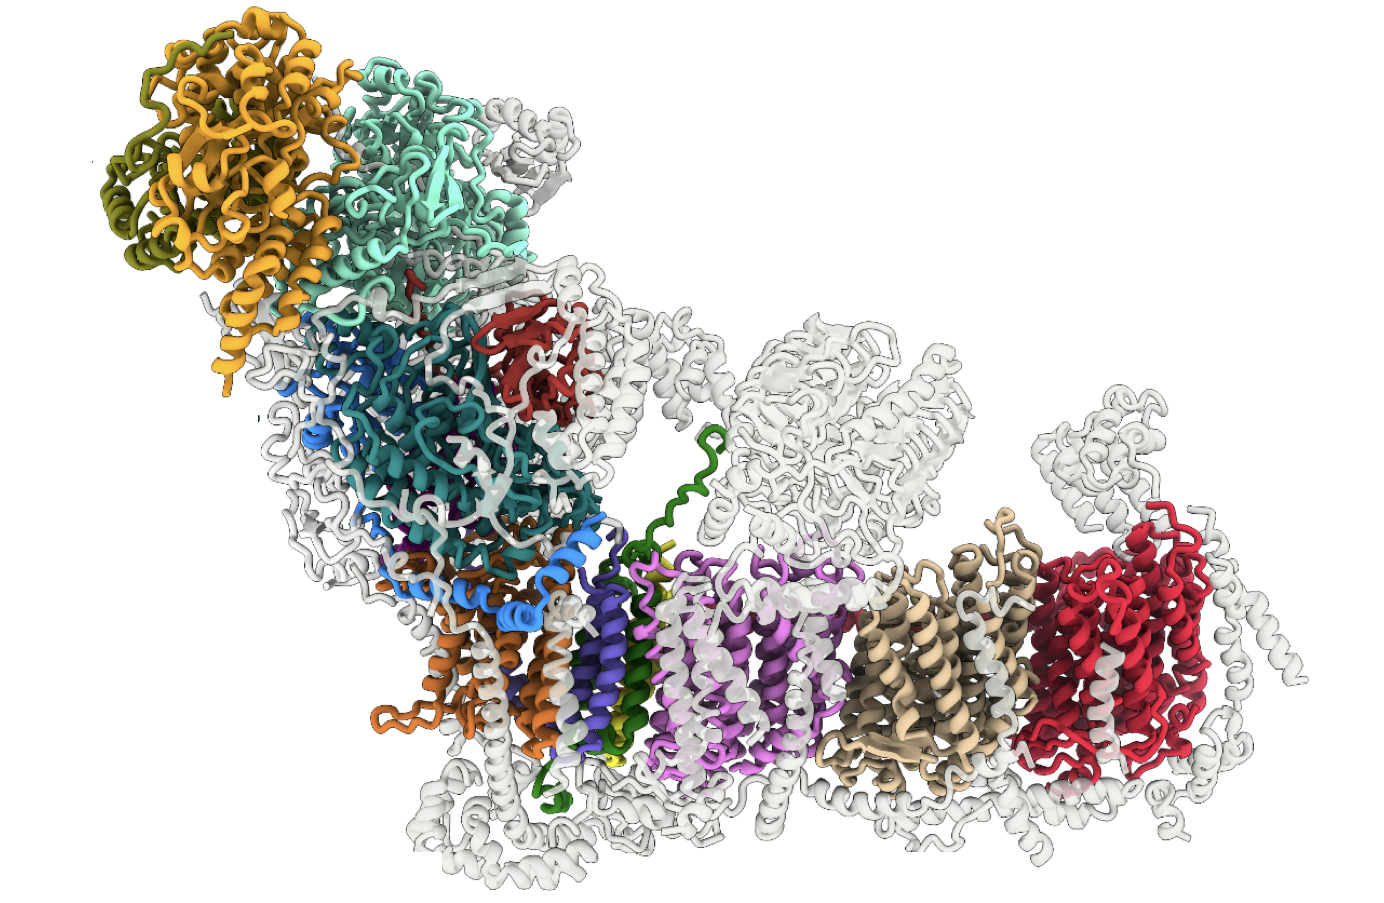 Plant mitochondrial complex 1 3D electron density model, taken by cryo-EM